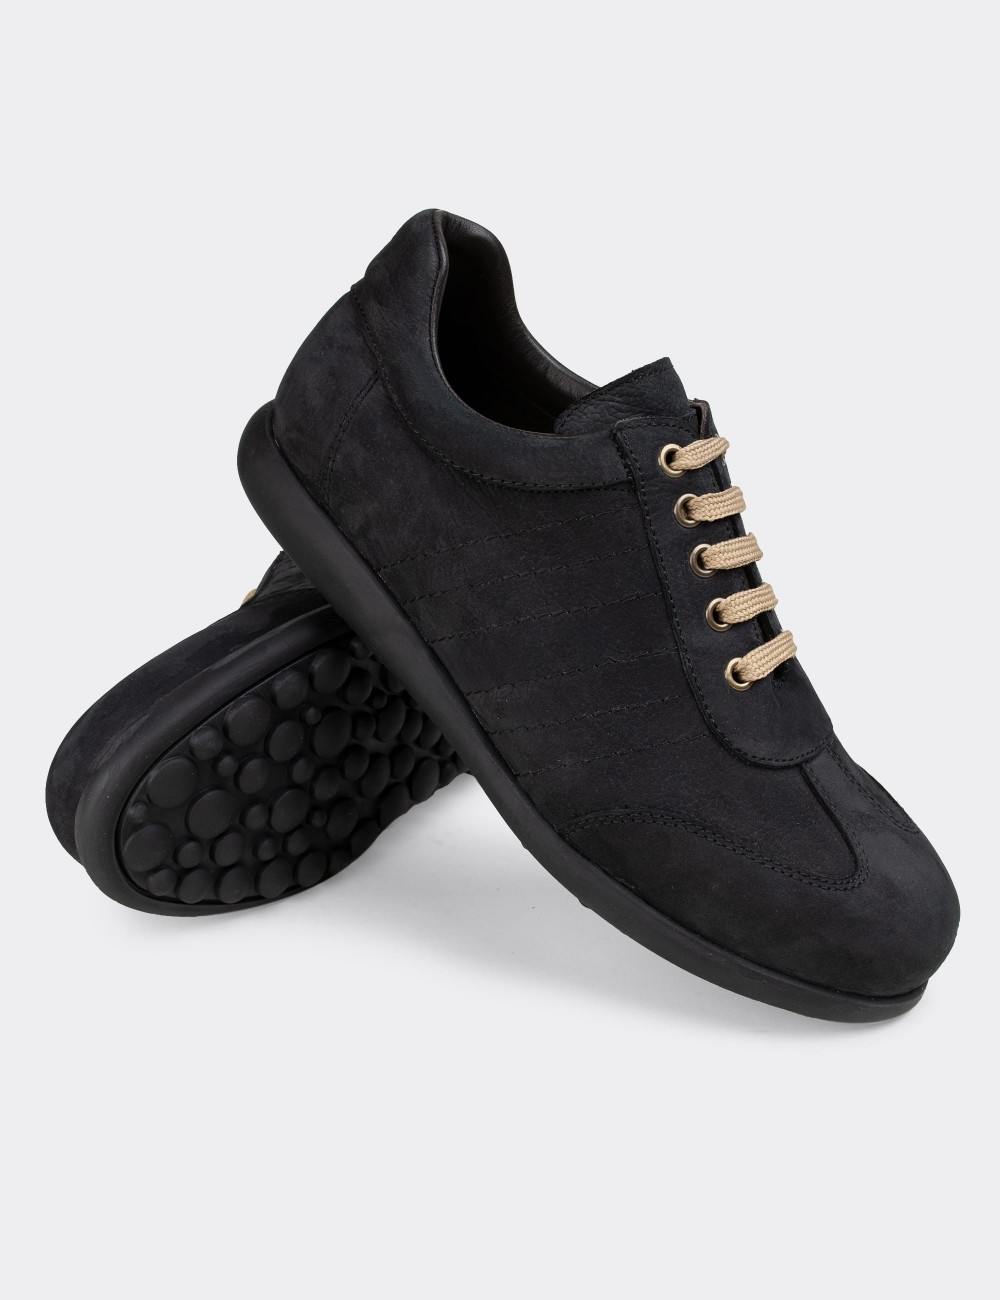 Navy Nubuck Leather Lace-up Shoes - 01826MLCVC02